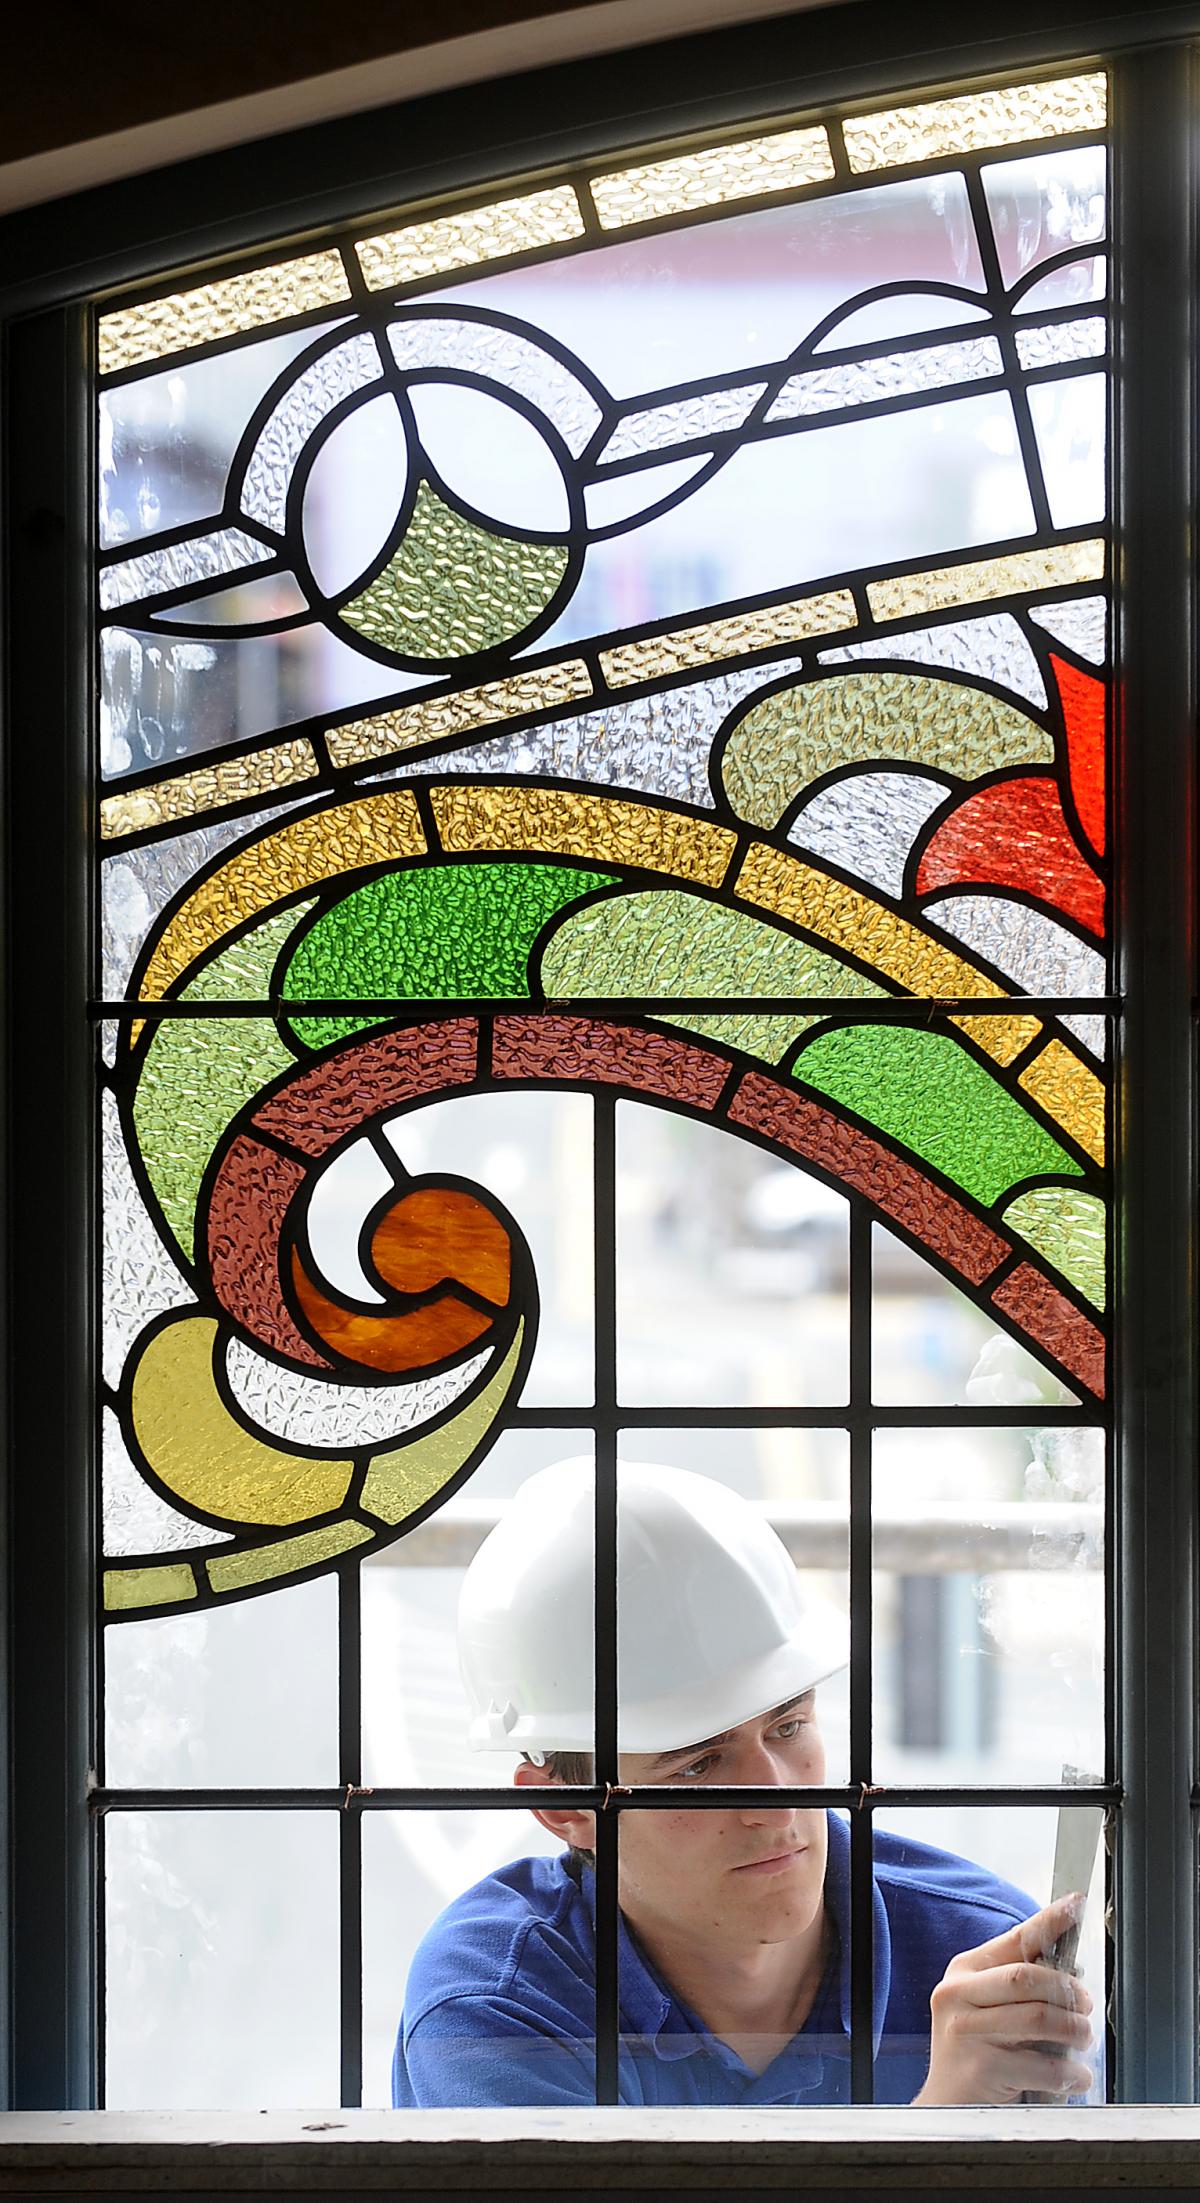 Adam Hague works on one of the stained glass windows at Eastbrook Hall